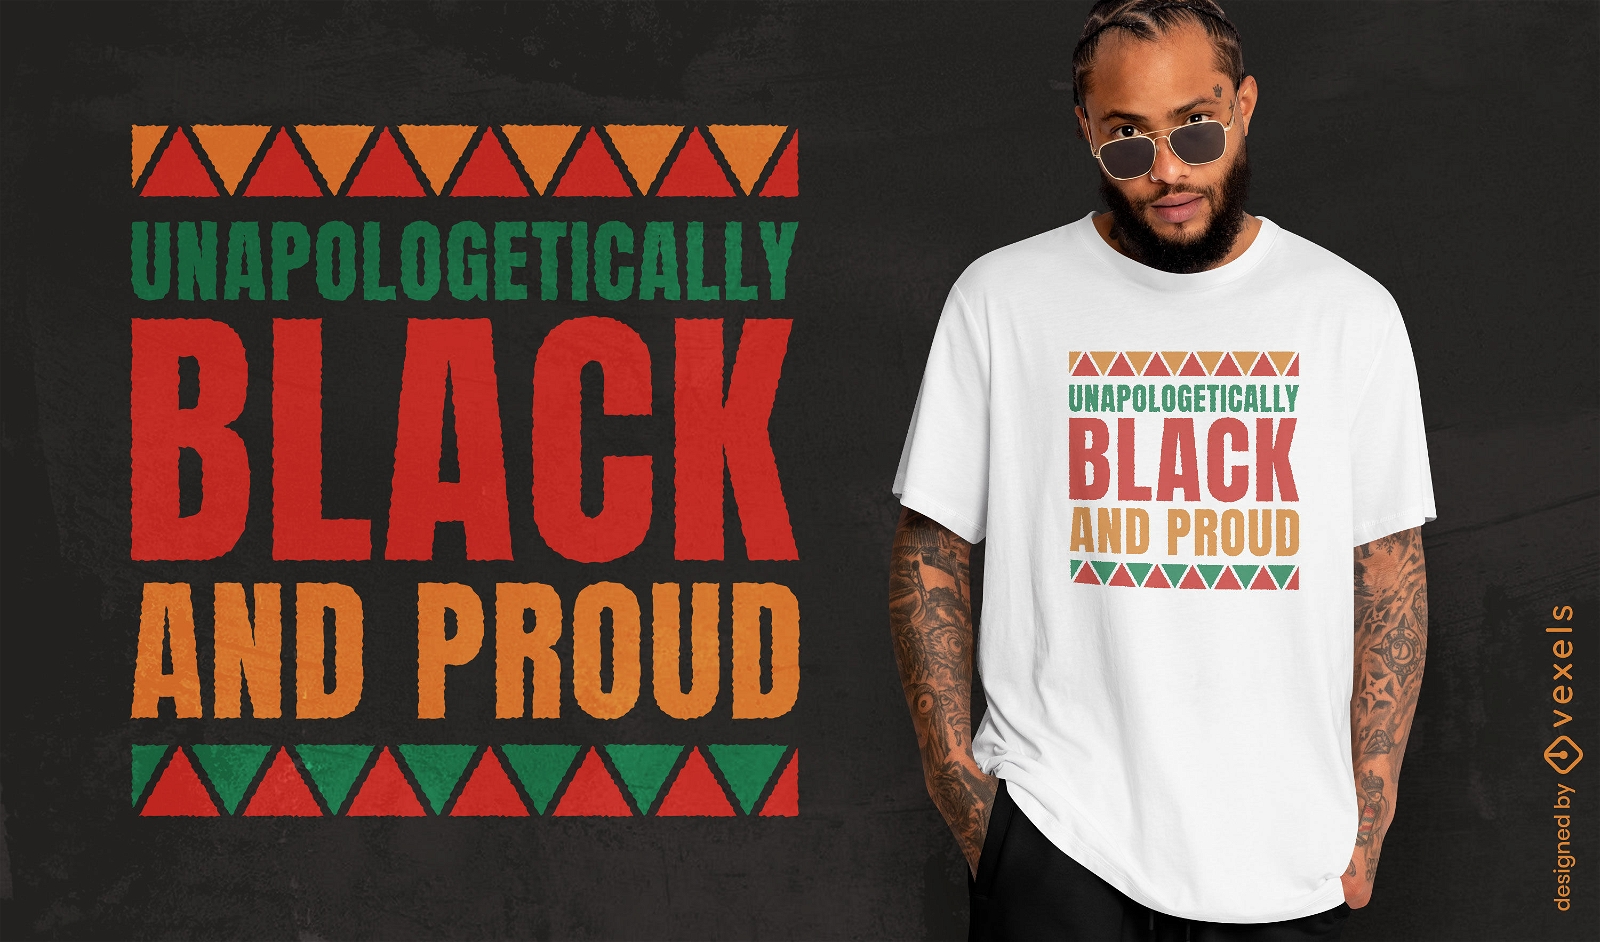 Black and proud t-shirt quote design